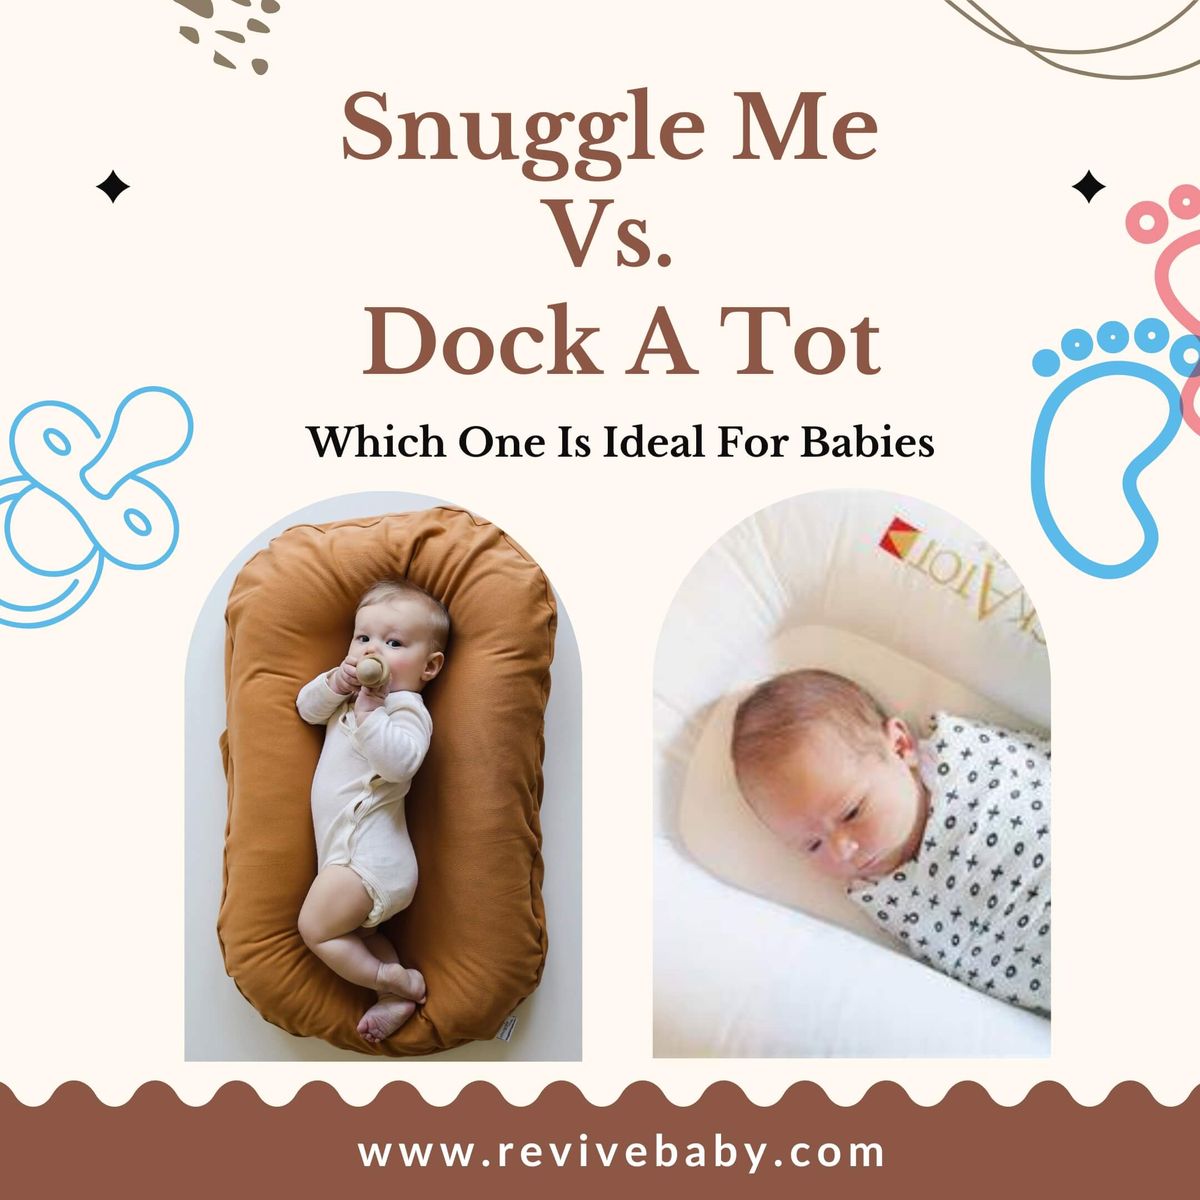 Snuggle Me Vs. Dock A Tot- Which One Is Ideal For Babies